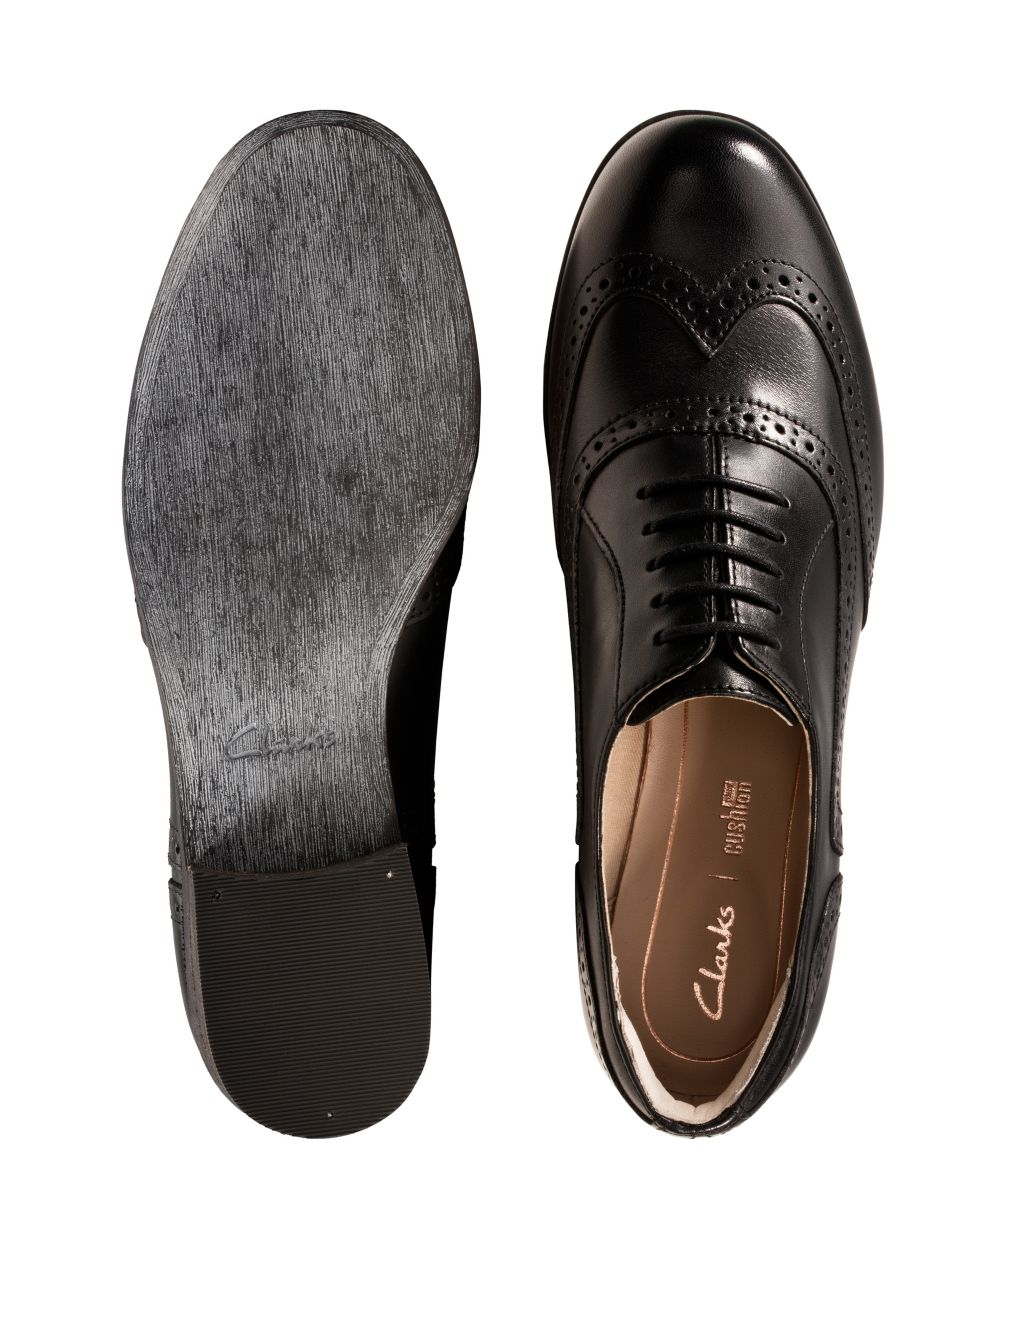 Wide Fit Leather Flat Brogues image 7